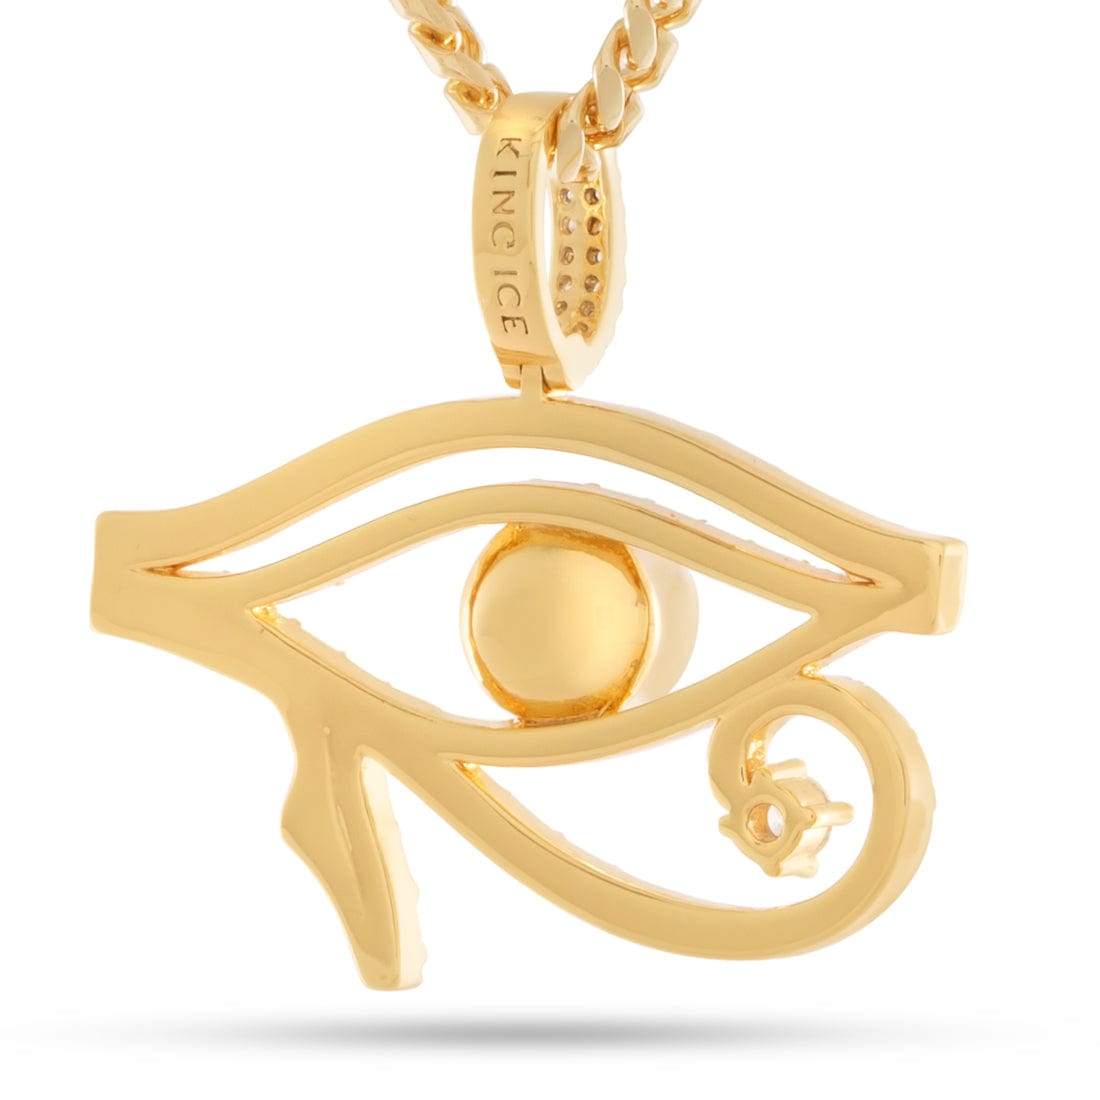 Pearl of Wisdom Eye of Ra Necklace, Egypt Pieces